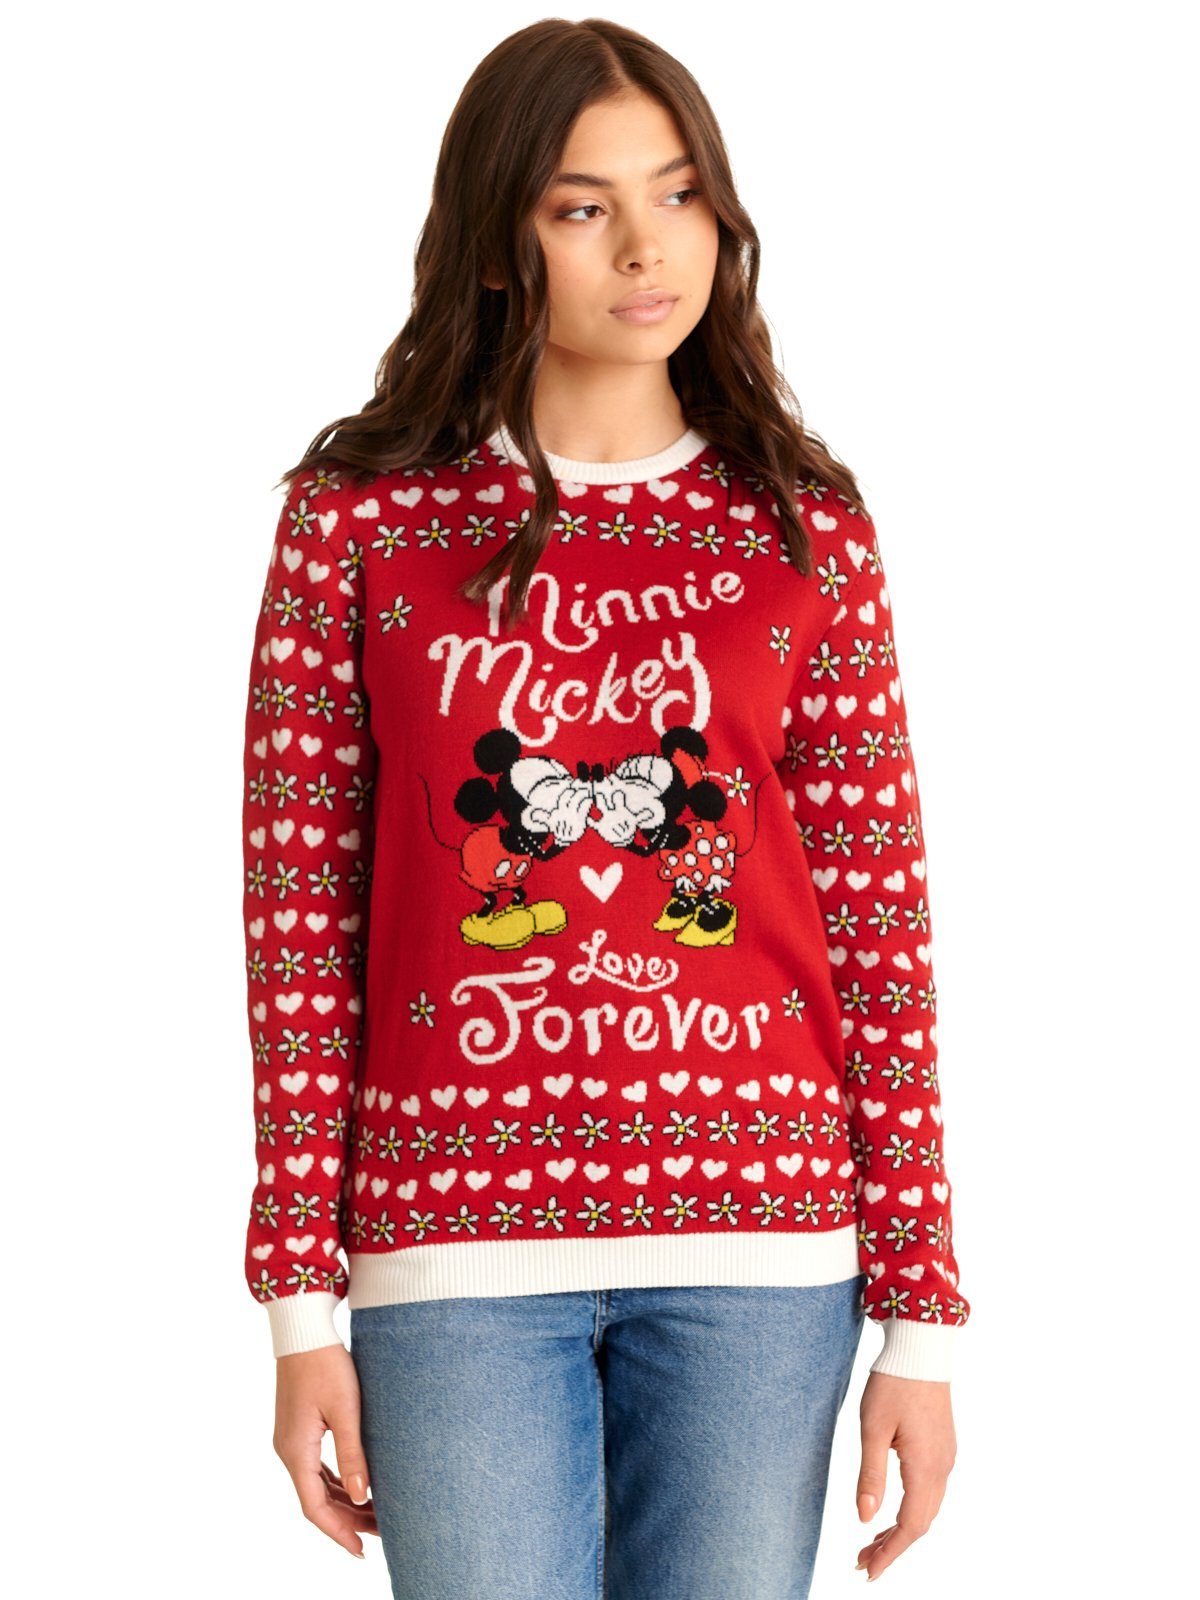 Damen Pullover Disney Strickpullover Mickey & Minnie Mouse Minnie Mouse Love Forever